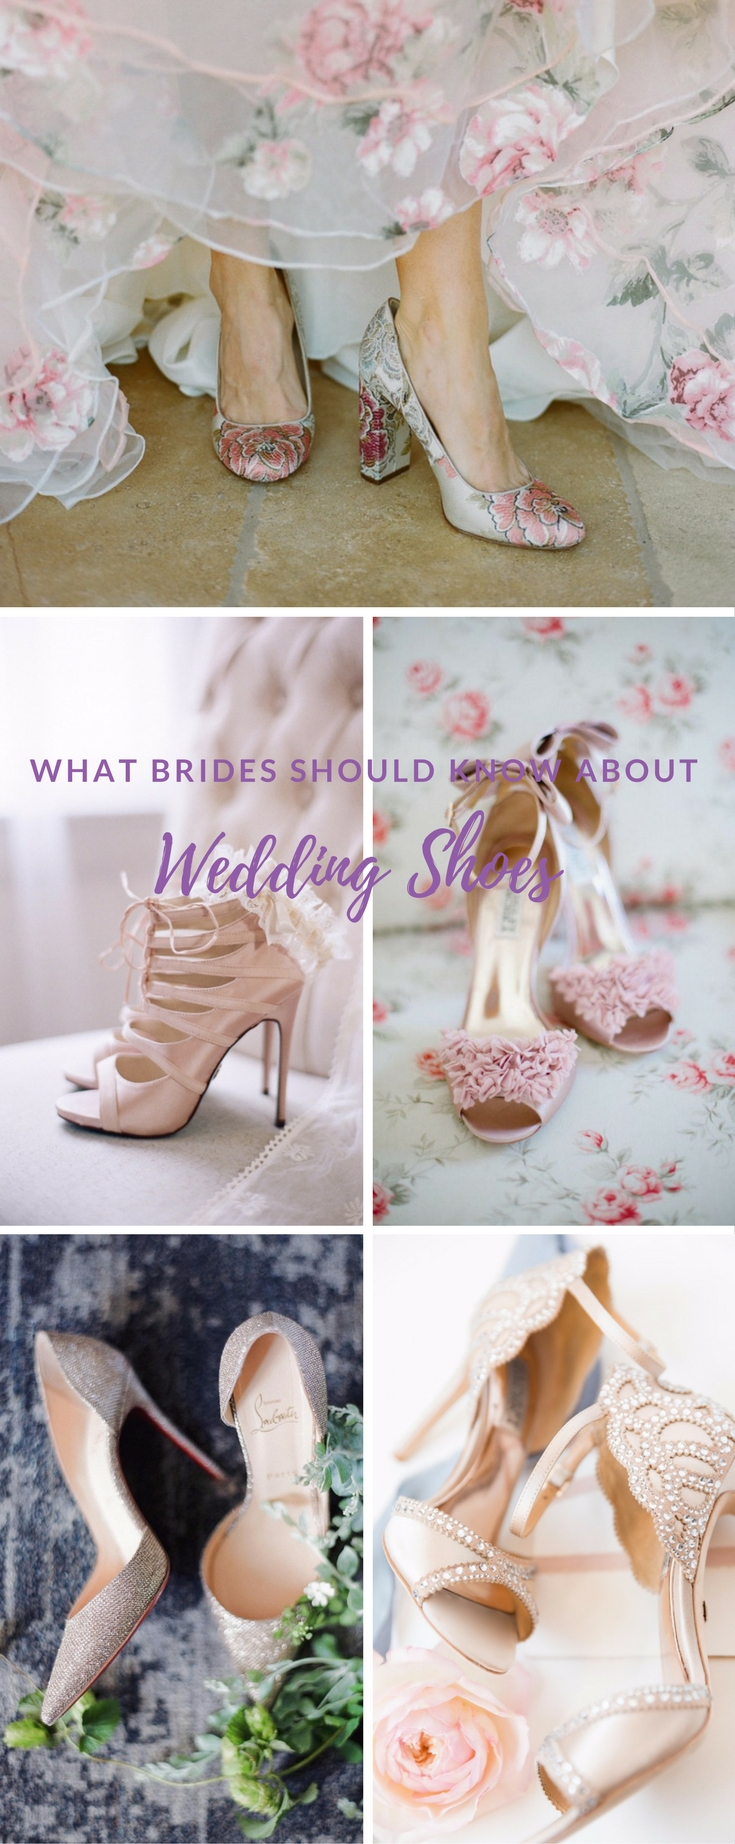 15 things you should know about choosing wedding shoes